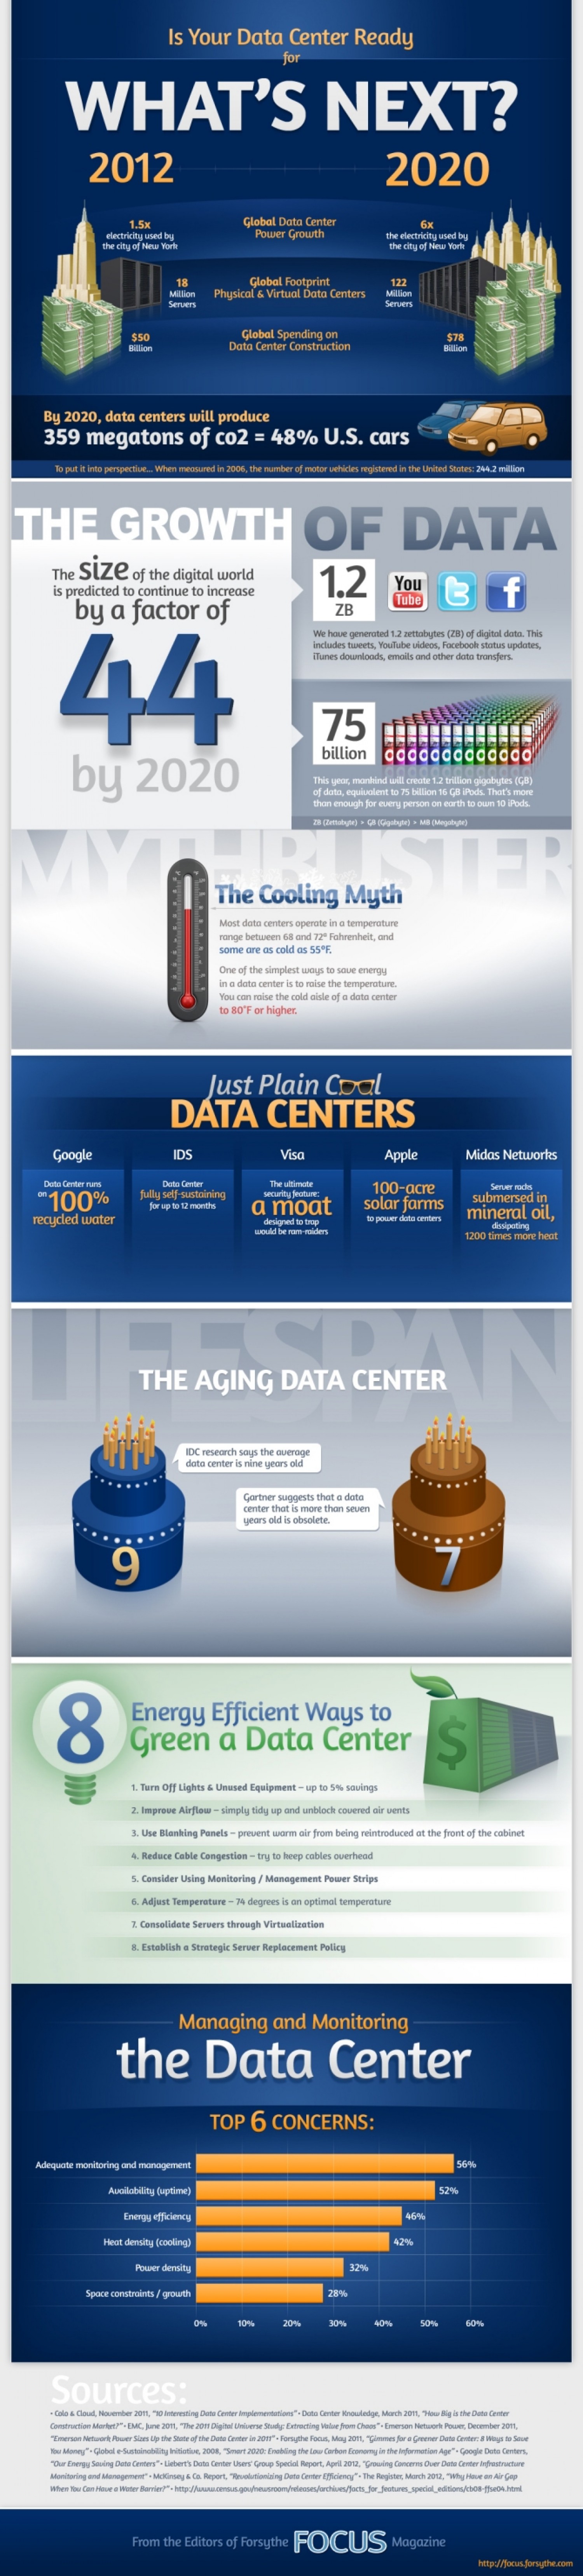 The data center: now and in the future